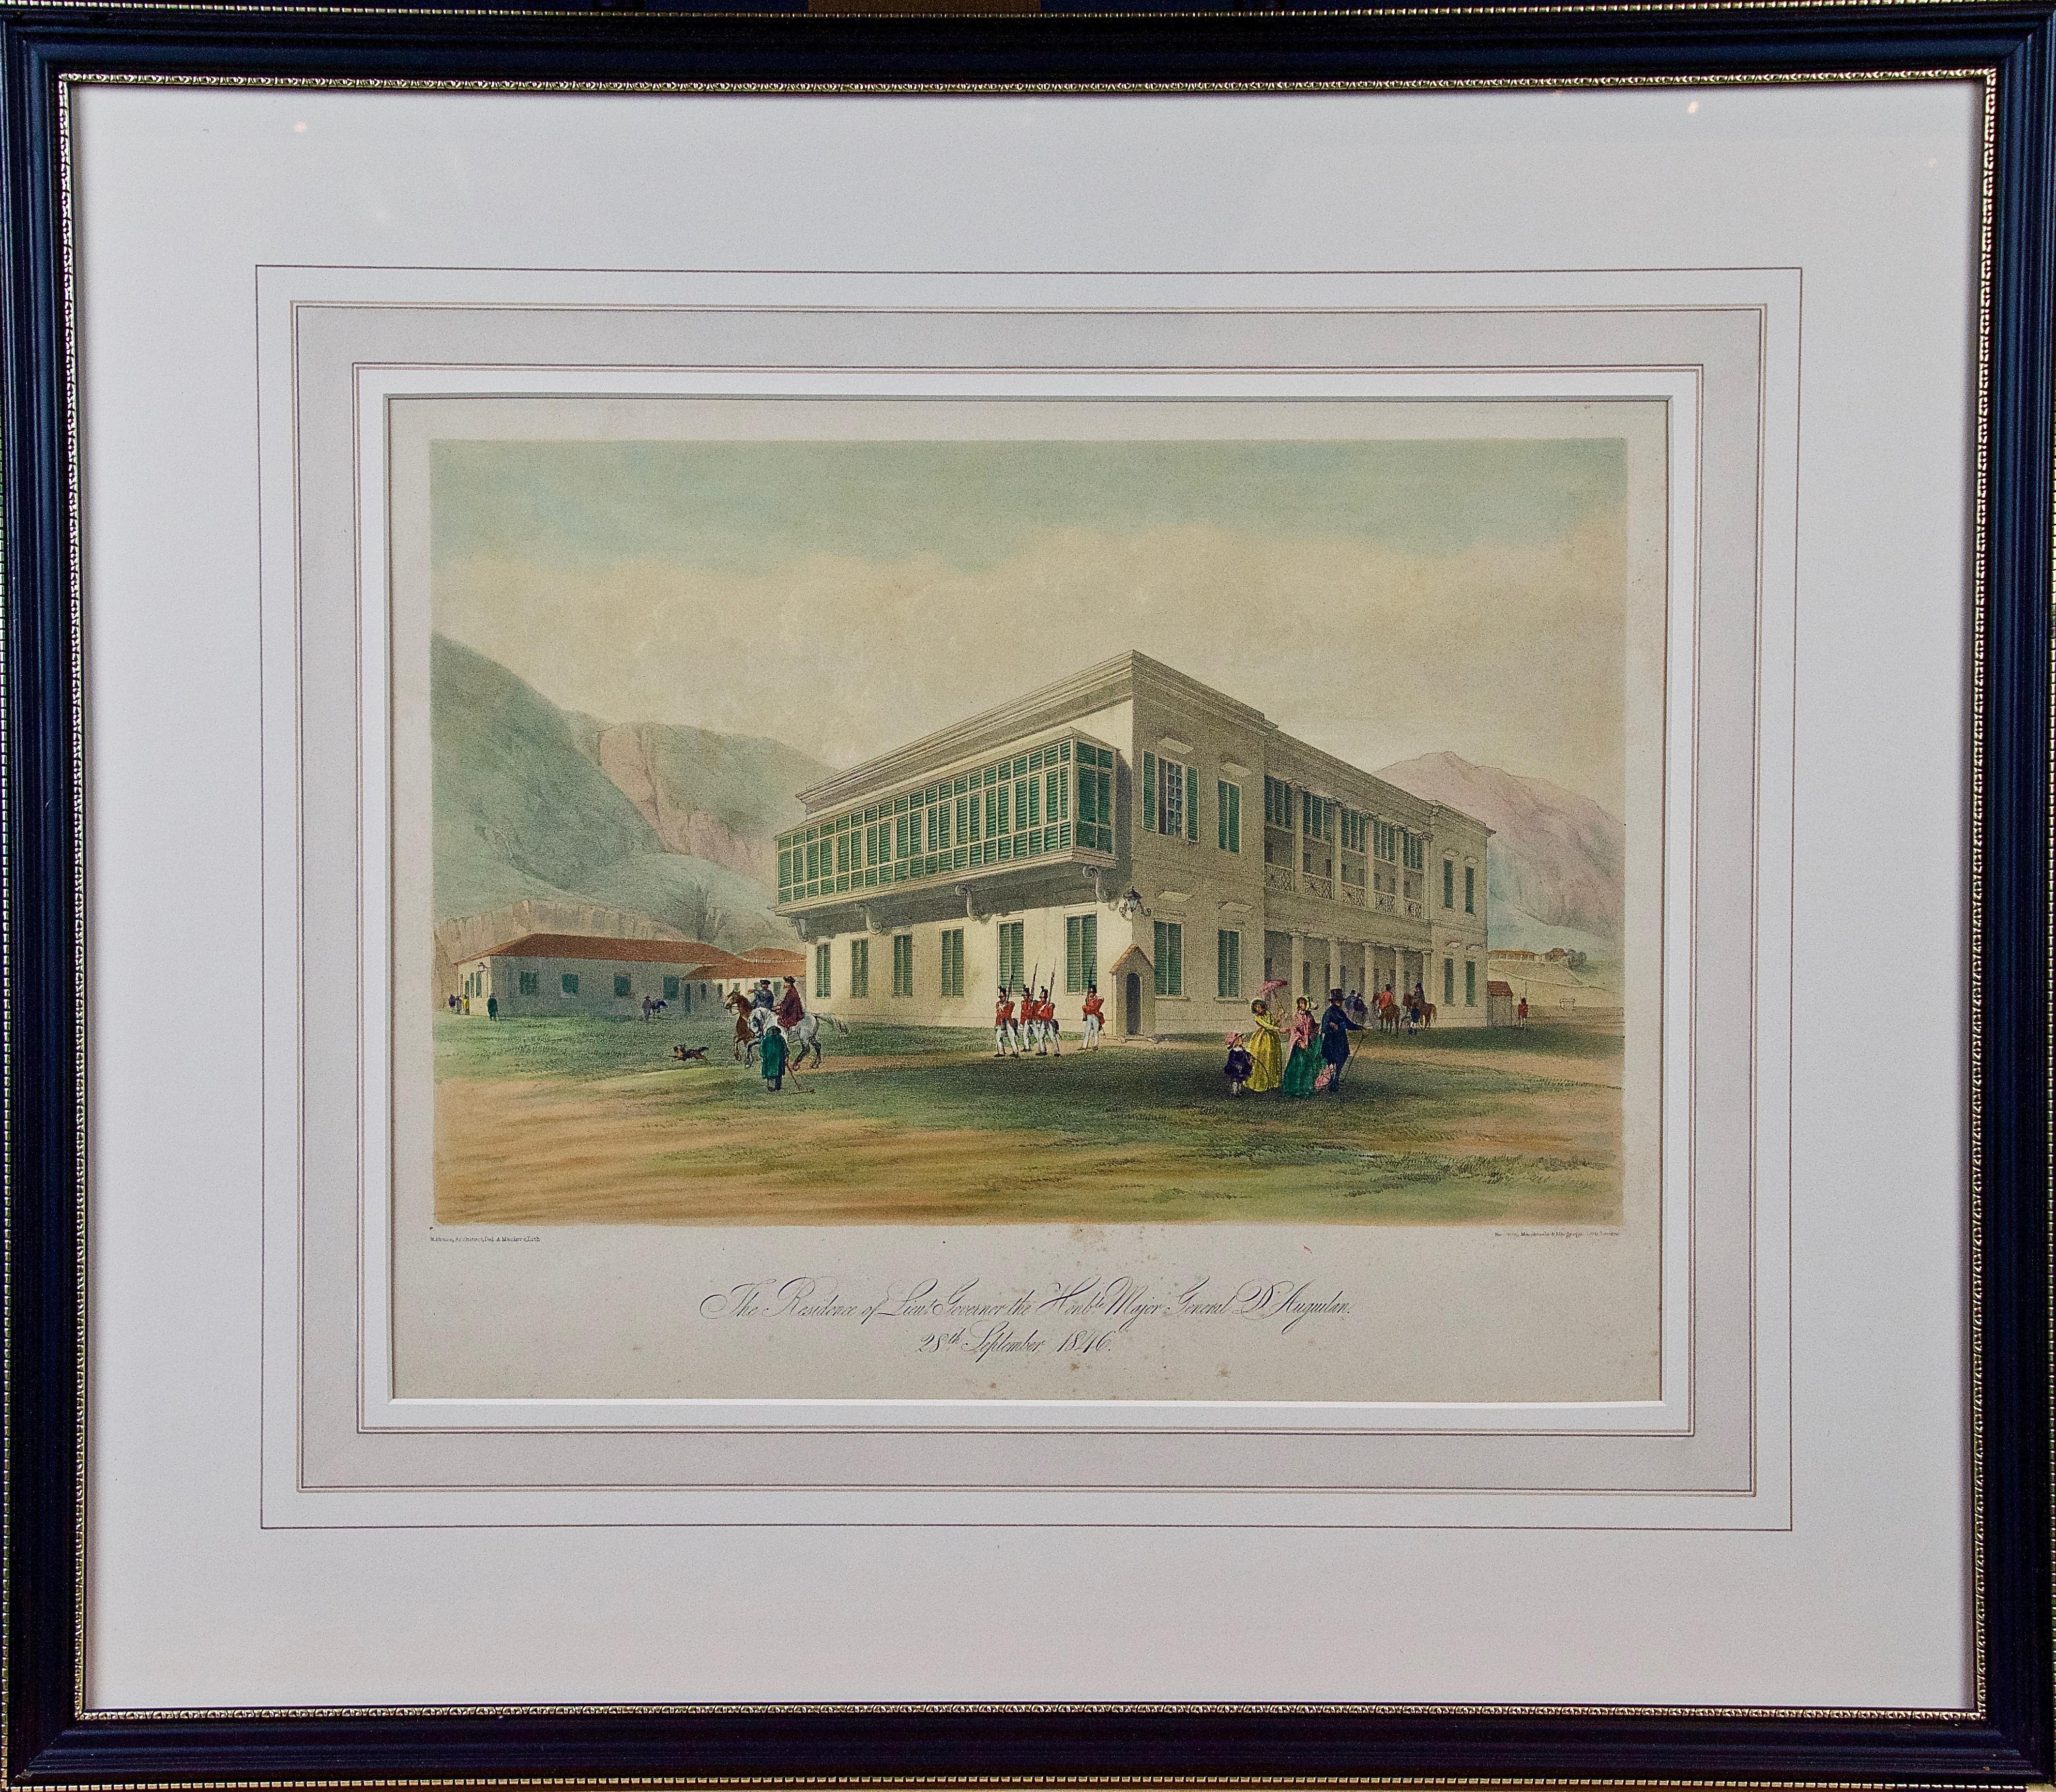 Murdoch Bruce Landscape Print - Architectural View of the Residence of the Lieutenant Governor, Hong Kong